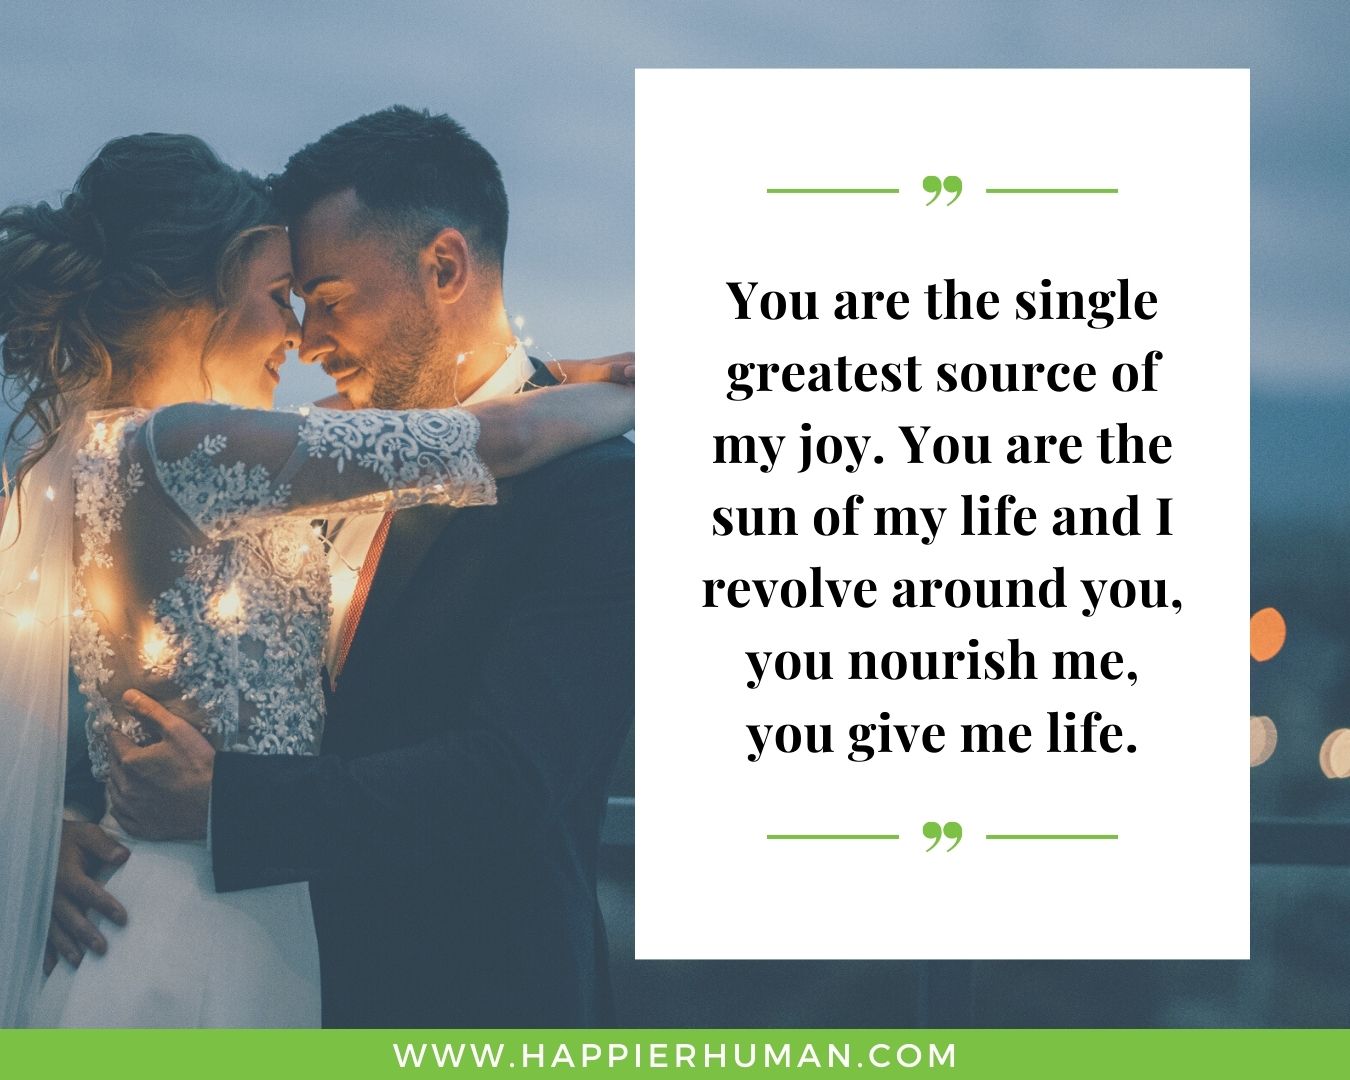 Love Quotes: 91 of the Best Romantic Quotes About Love